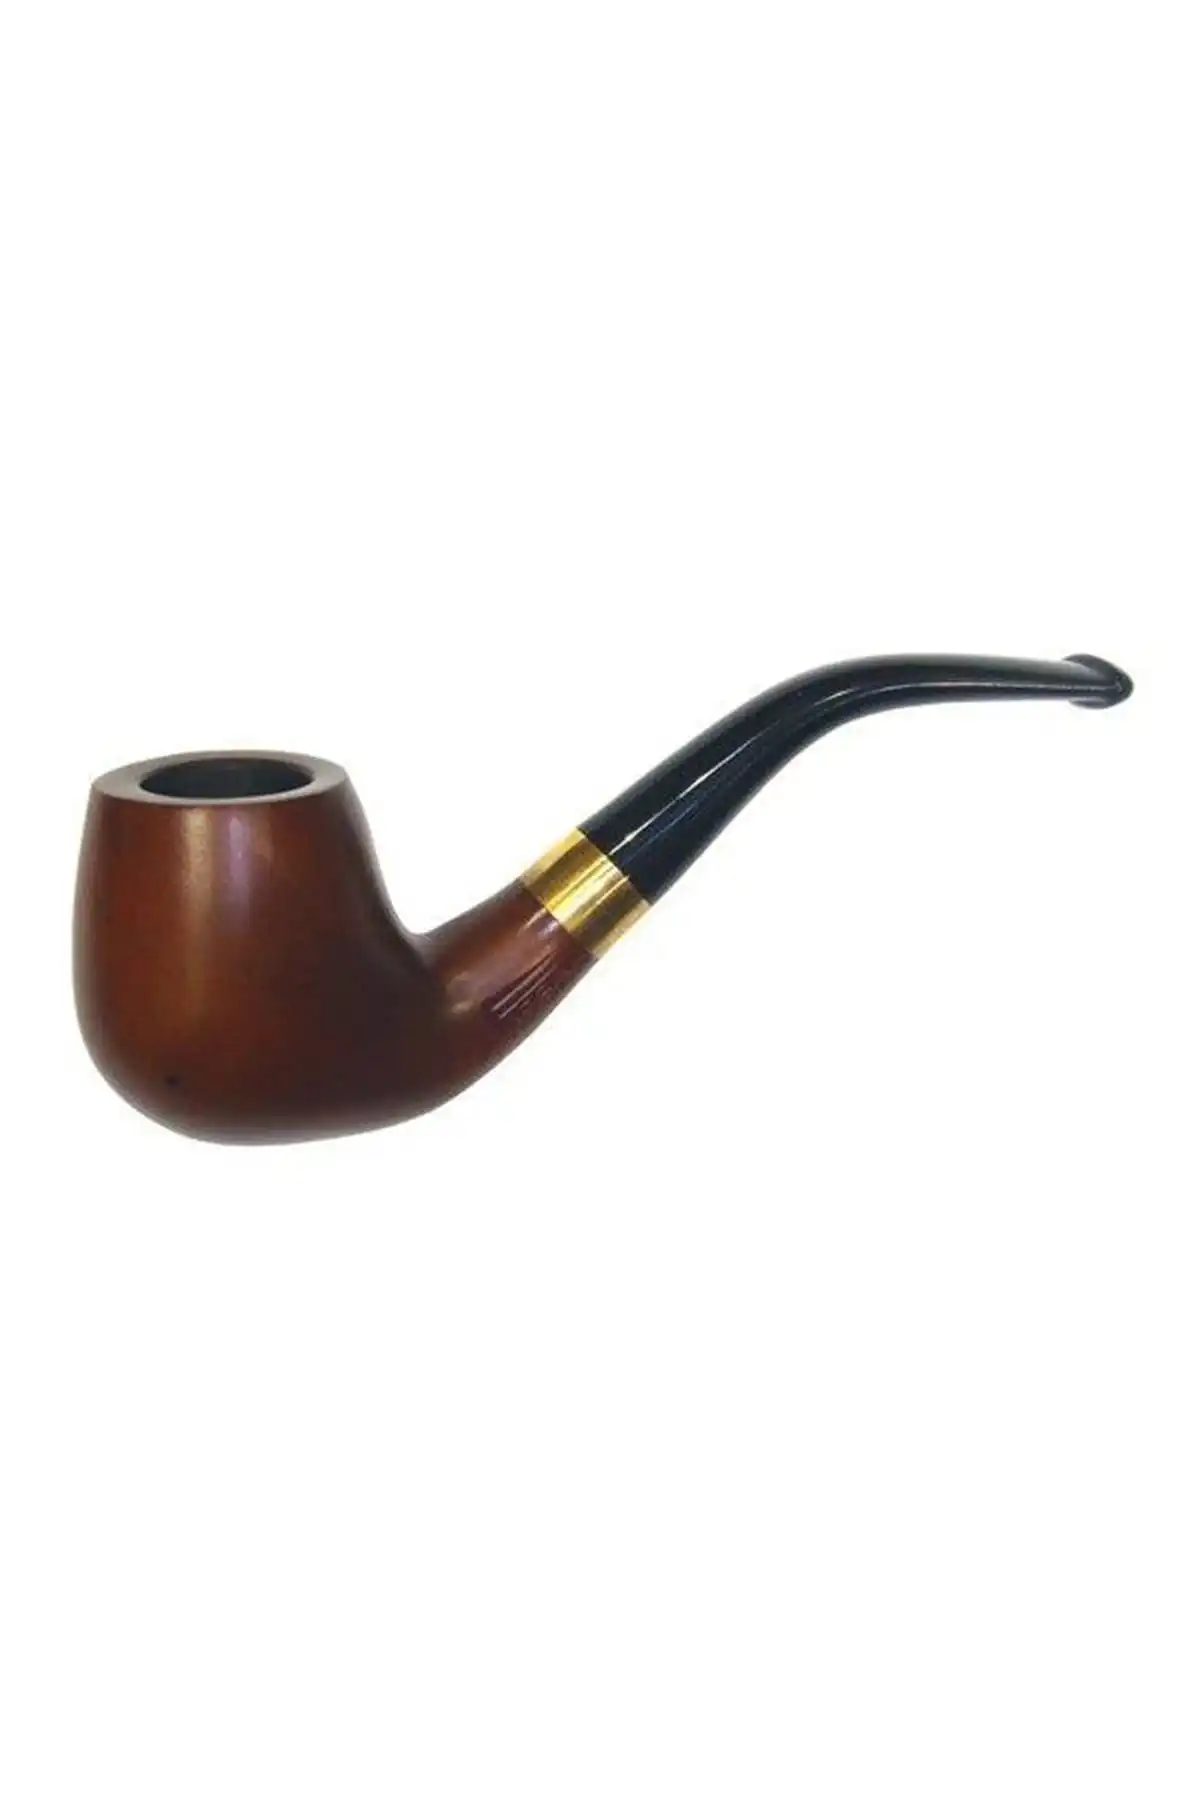 European Handcrafted Medium Sailor Wood Tobacco Pipe With Metal Filter Black 